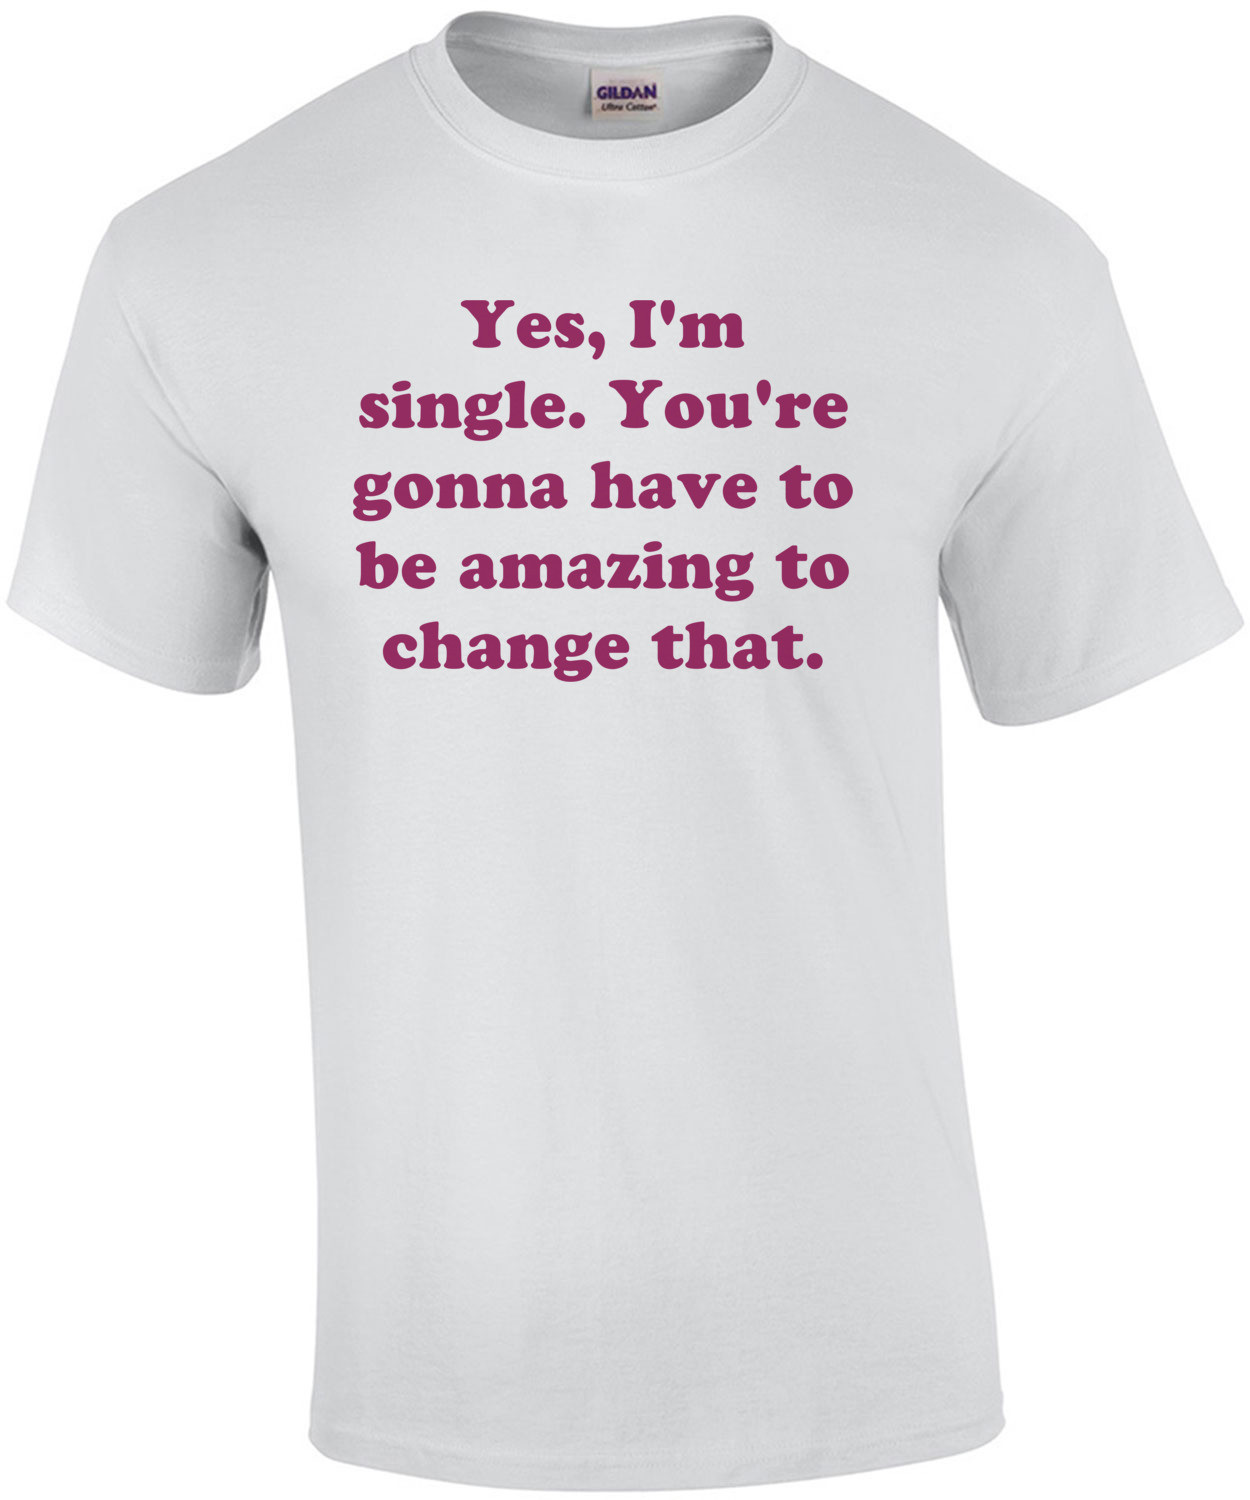 Yes, I'm single. You're gonna have to be amazing to change that. Shirt